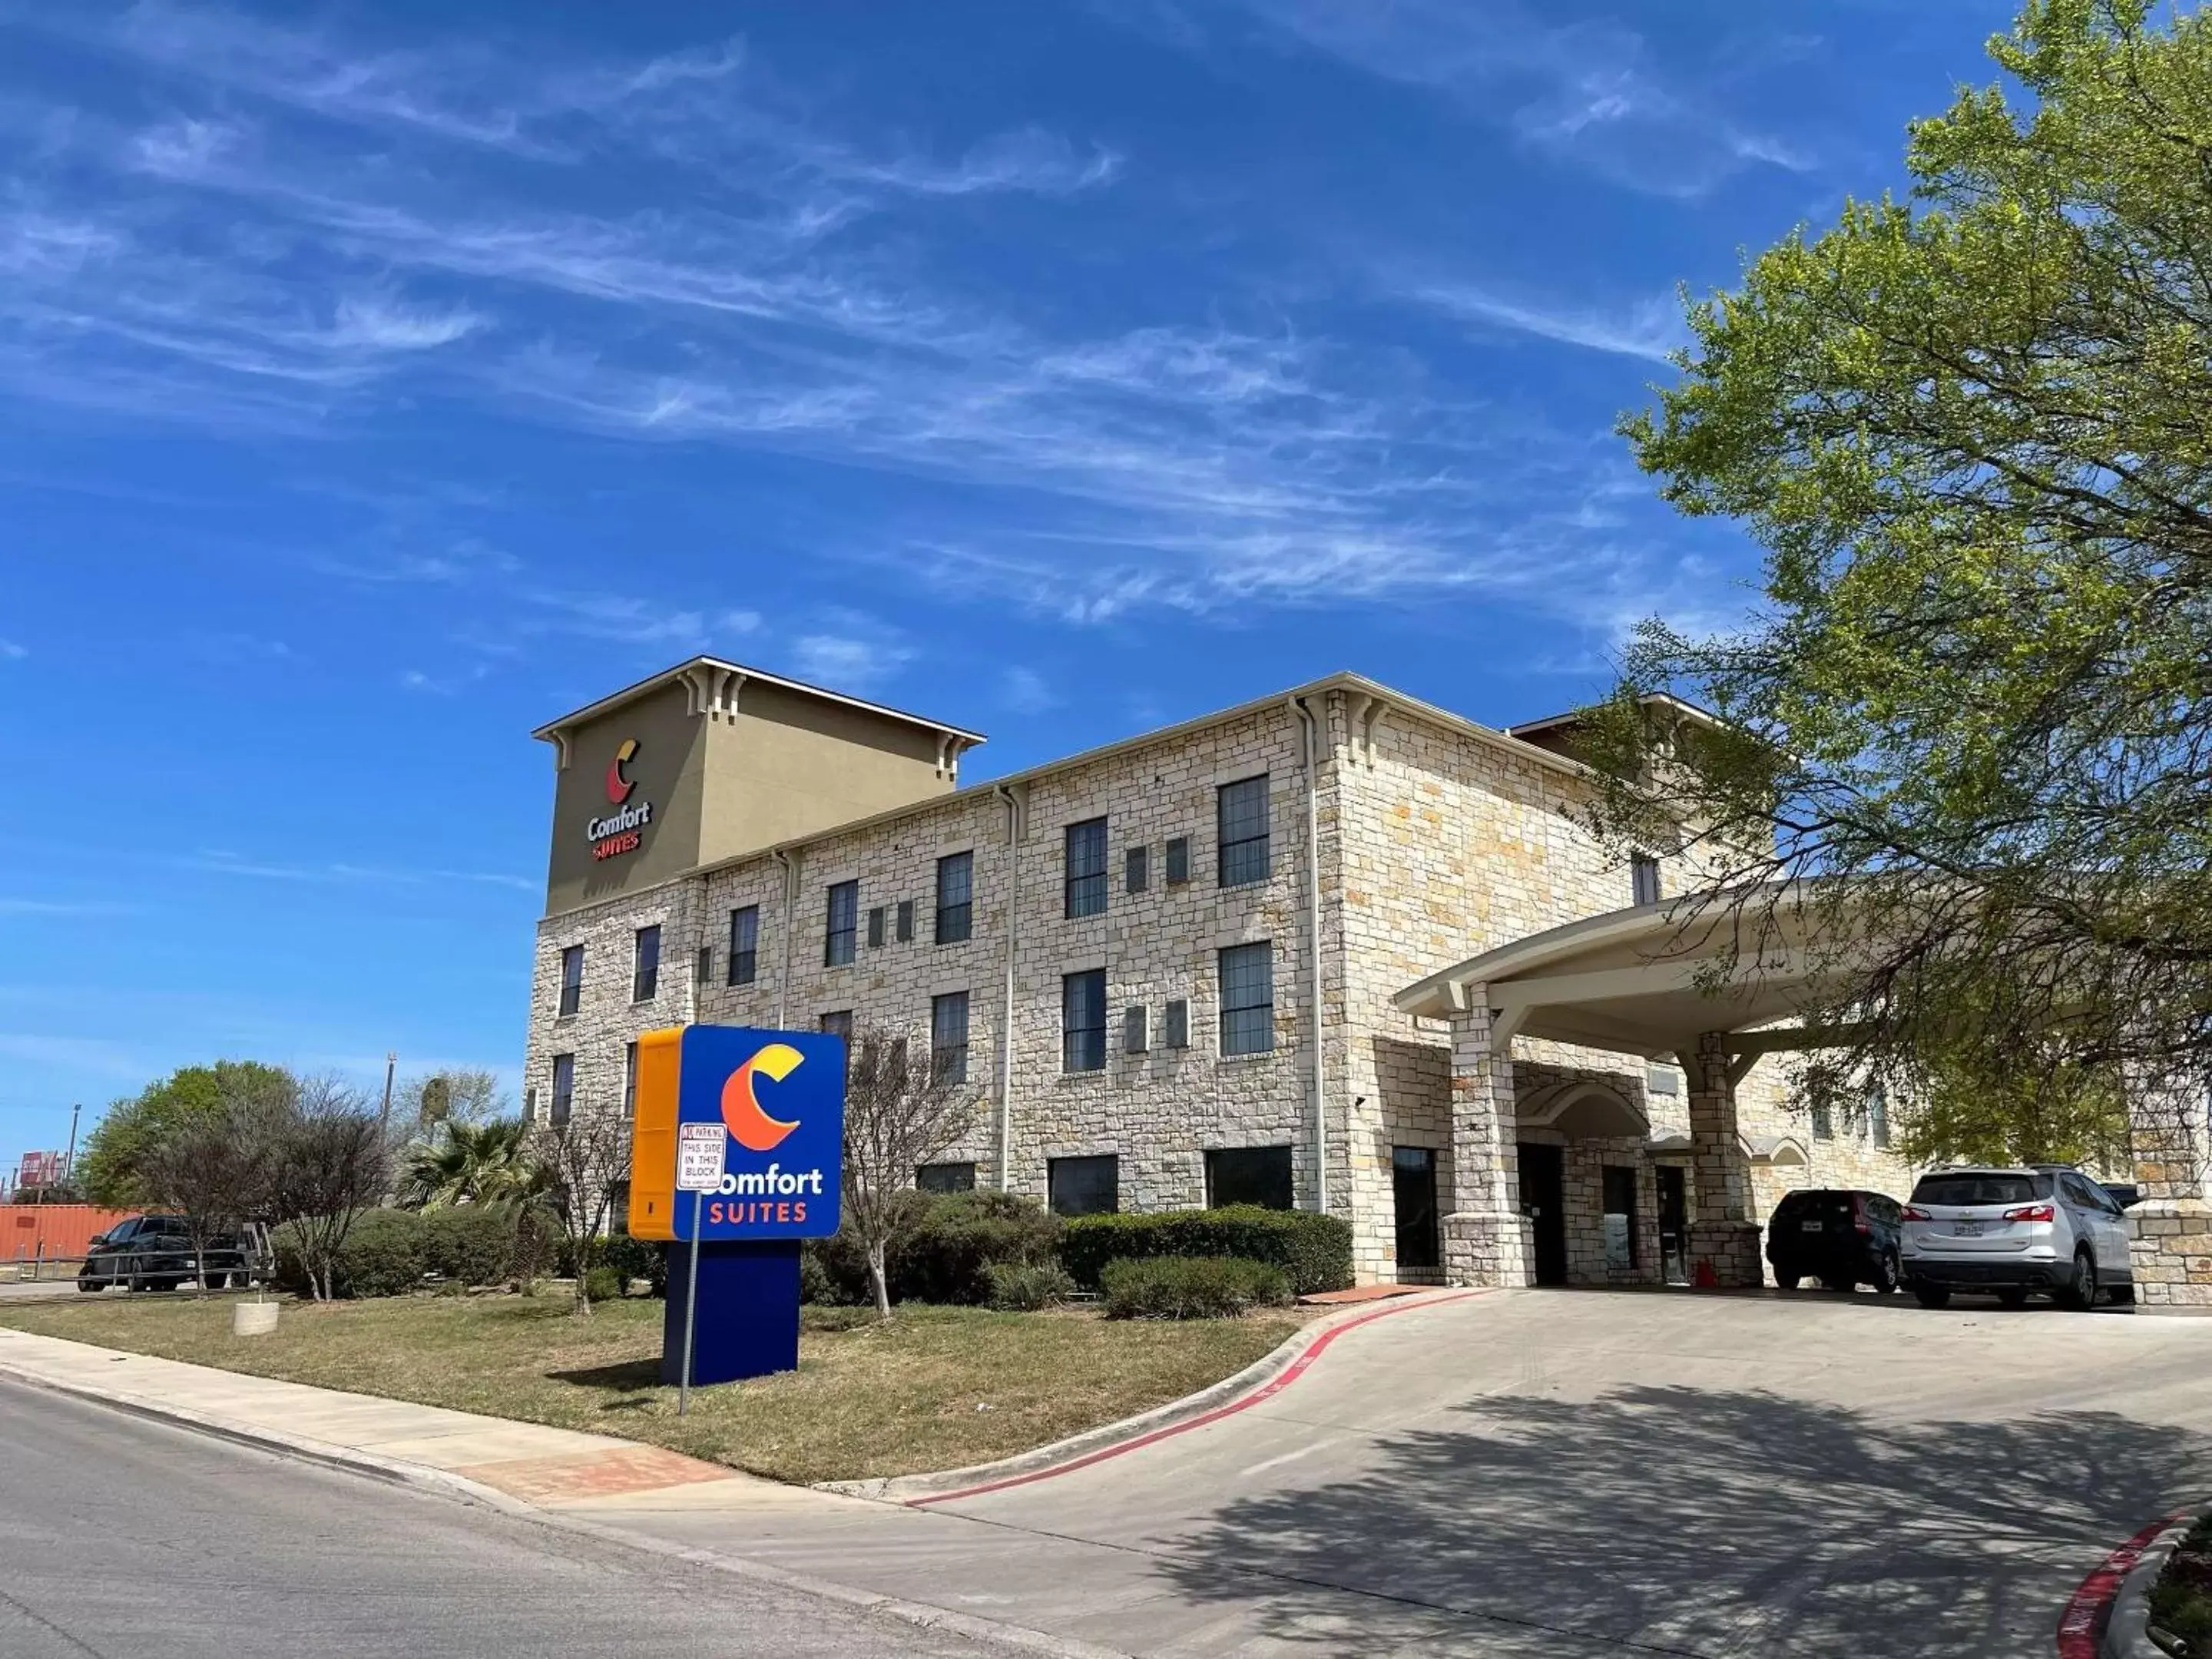 Property Building in Comfort Suites Sea World/ Lackland